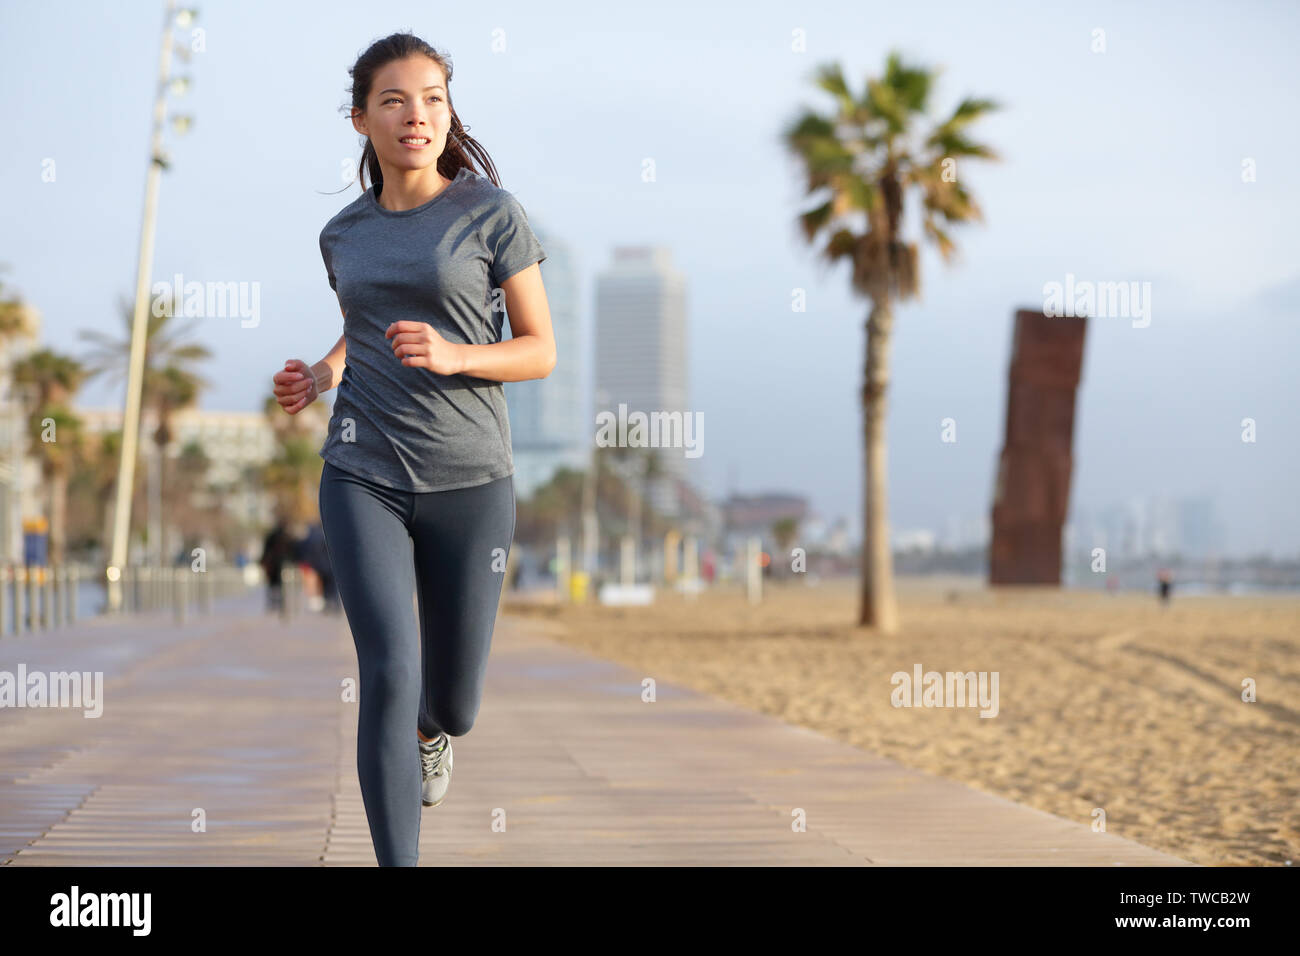 Running woman jogging on Barcelona Beach, Barceloneta. Healthy lifestyle girl  runner training outside on boardwalk. Mixed race Asian Caucasian fitness  woman working out outdoors in Catalonia, Spain Stock Photo - Alamy